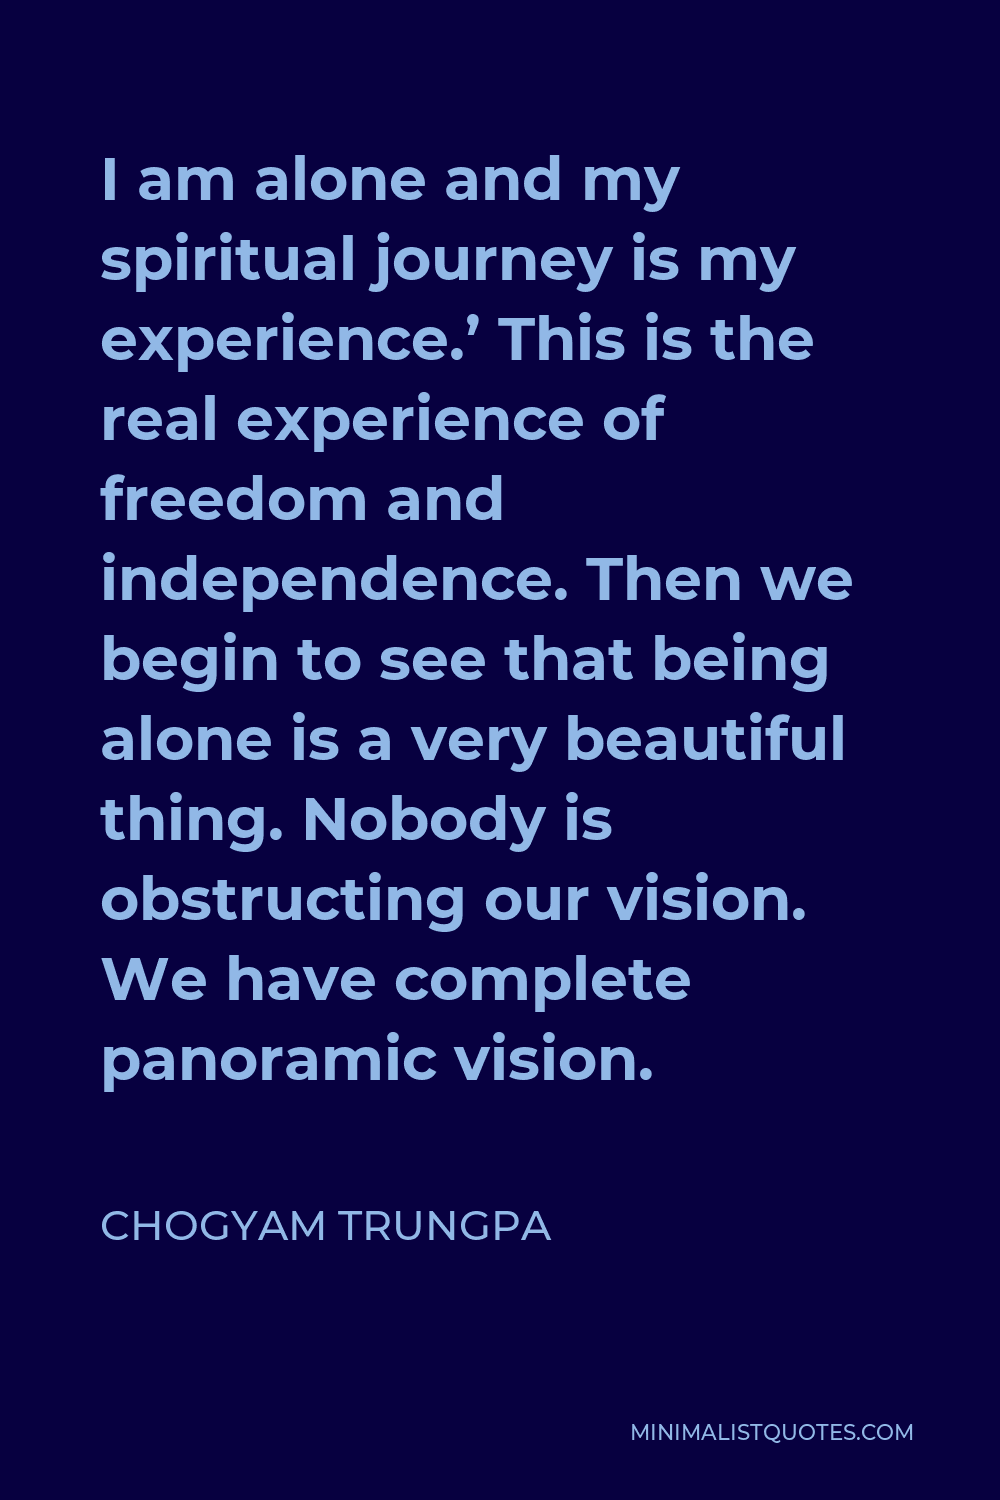 Chogyam Trungpa Quote - I am alone and my spiritual journey is my experience.’ This is the real experience of freedom and independence. Then we begin to see that being alone is a very beautiful thing. Nobody is obstructing our vision. We have complete panoramic vision.